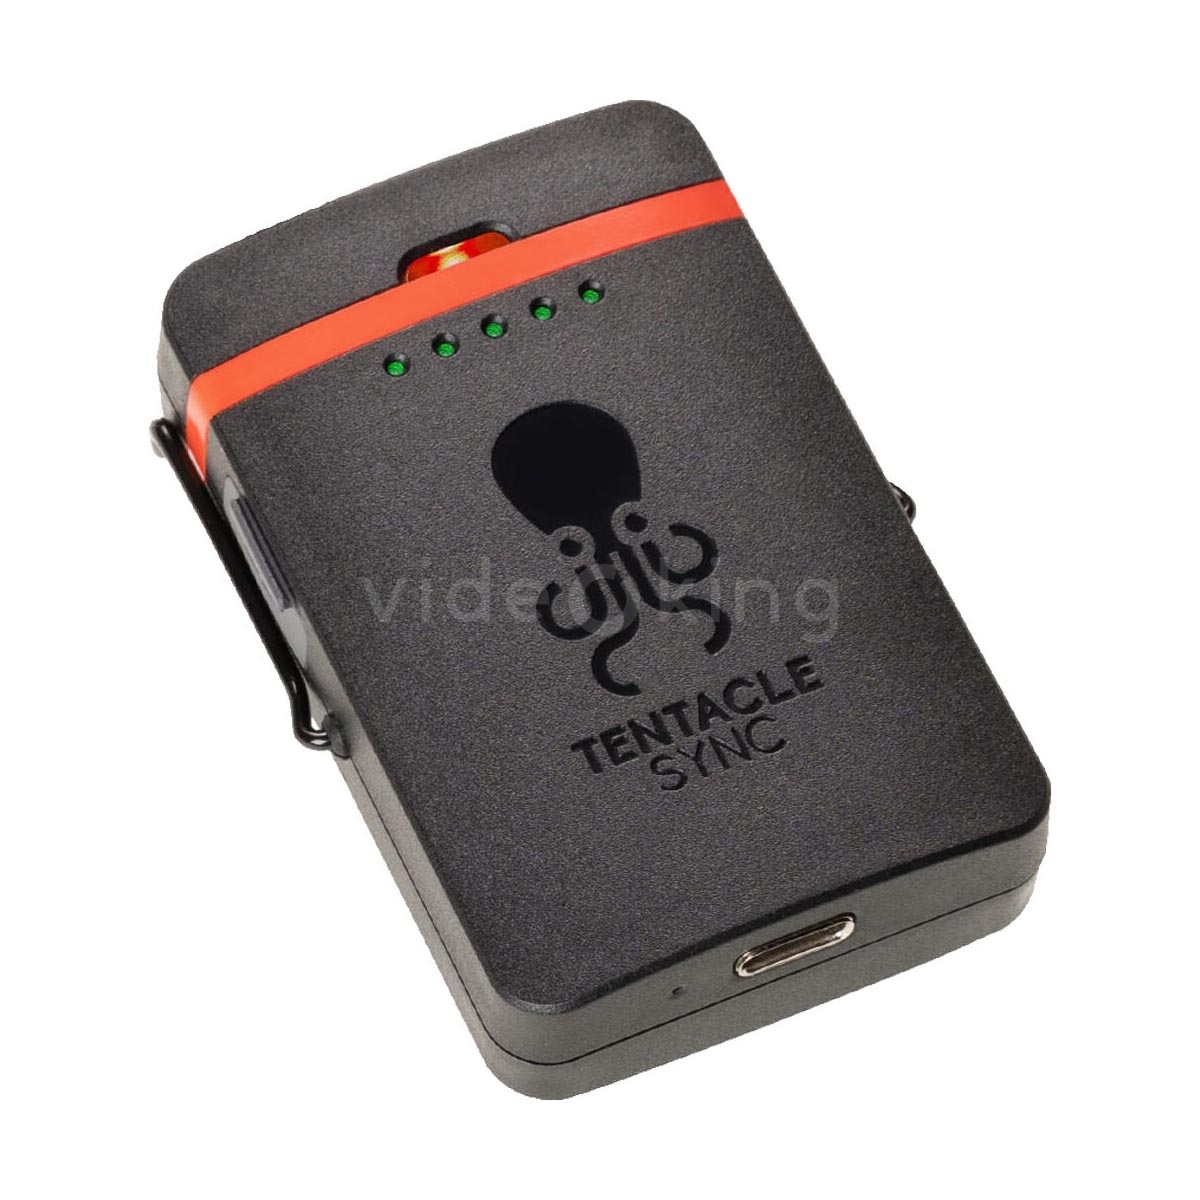 Tentacle TRACK E – Basic Box (Recorder Unit Only)